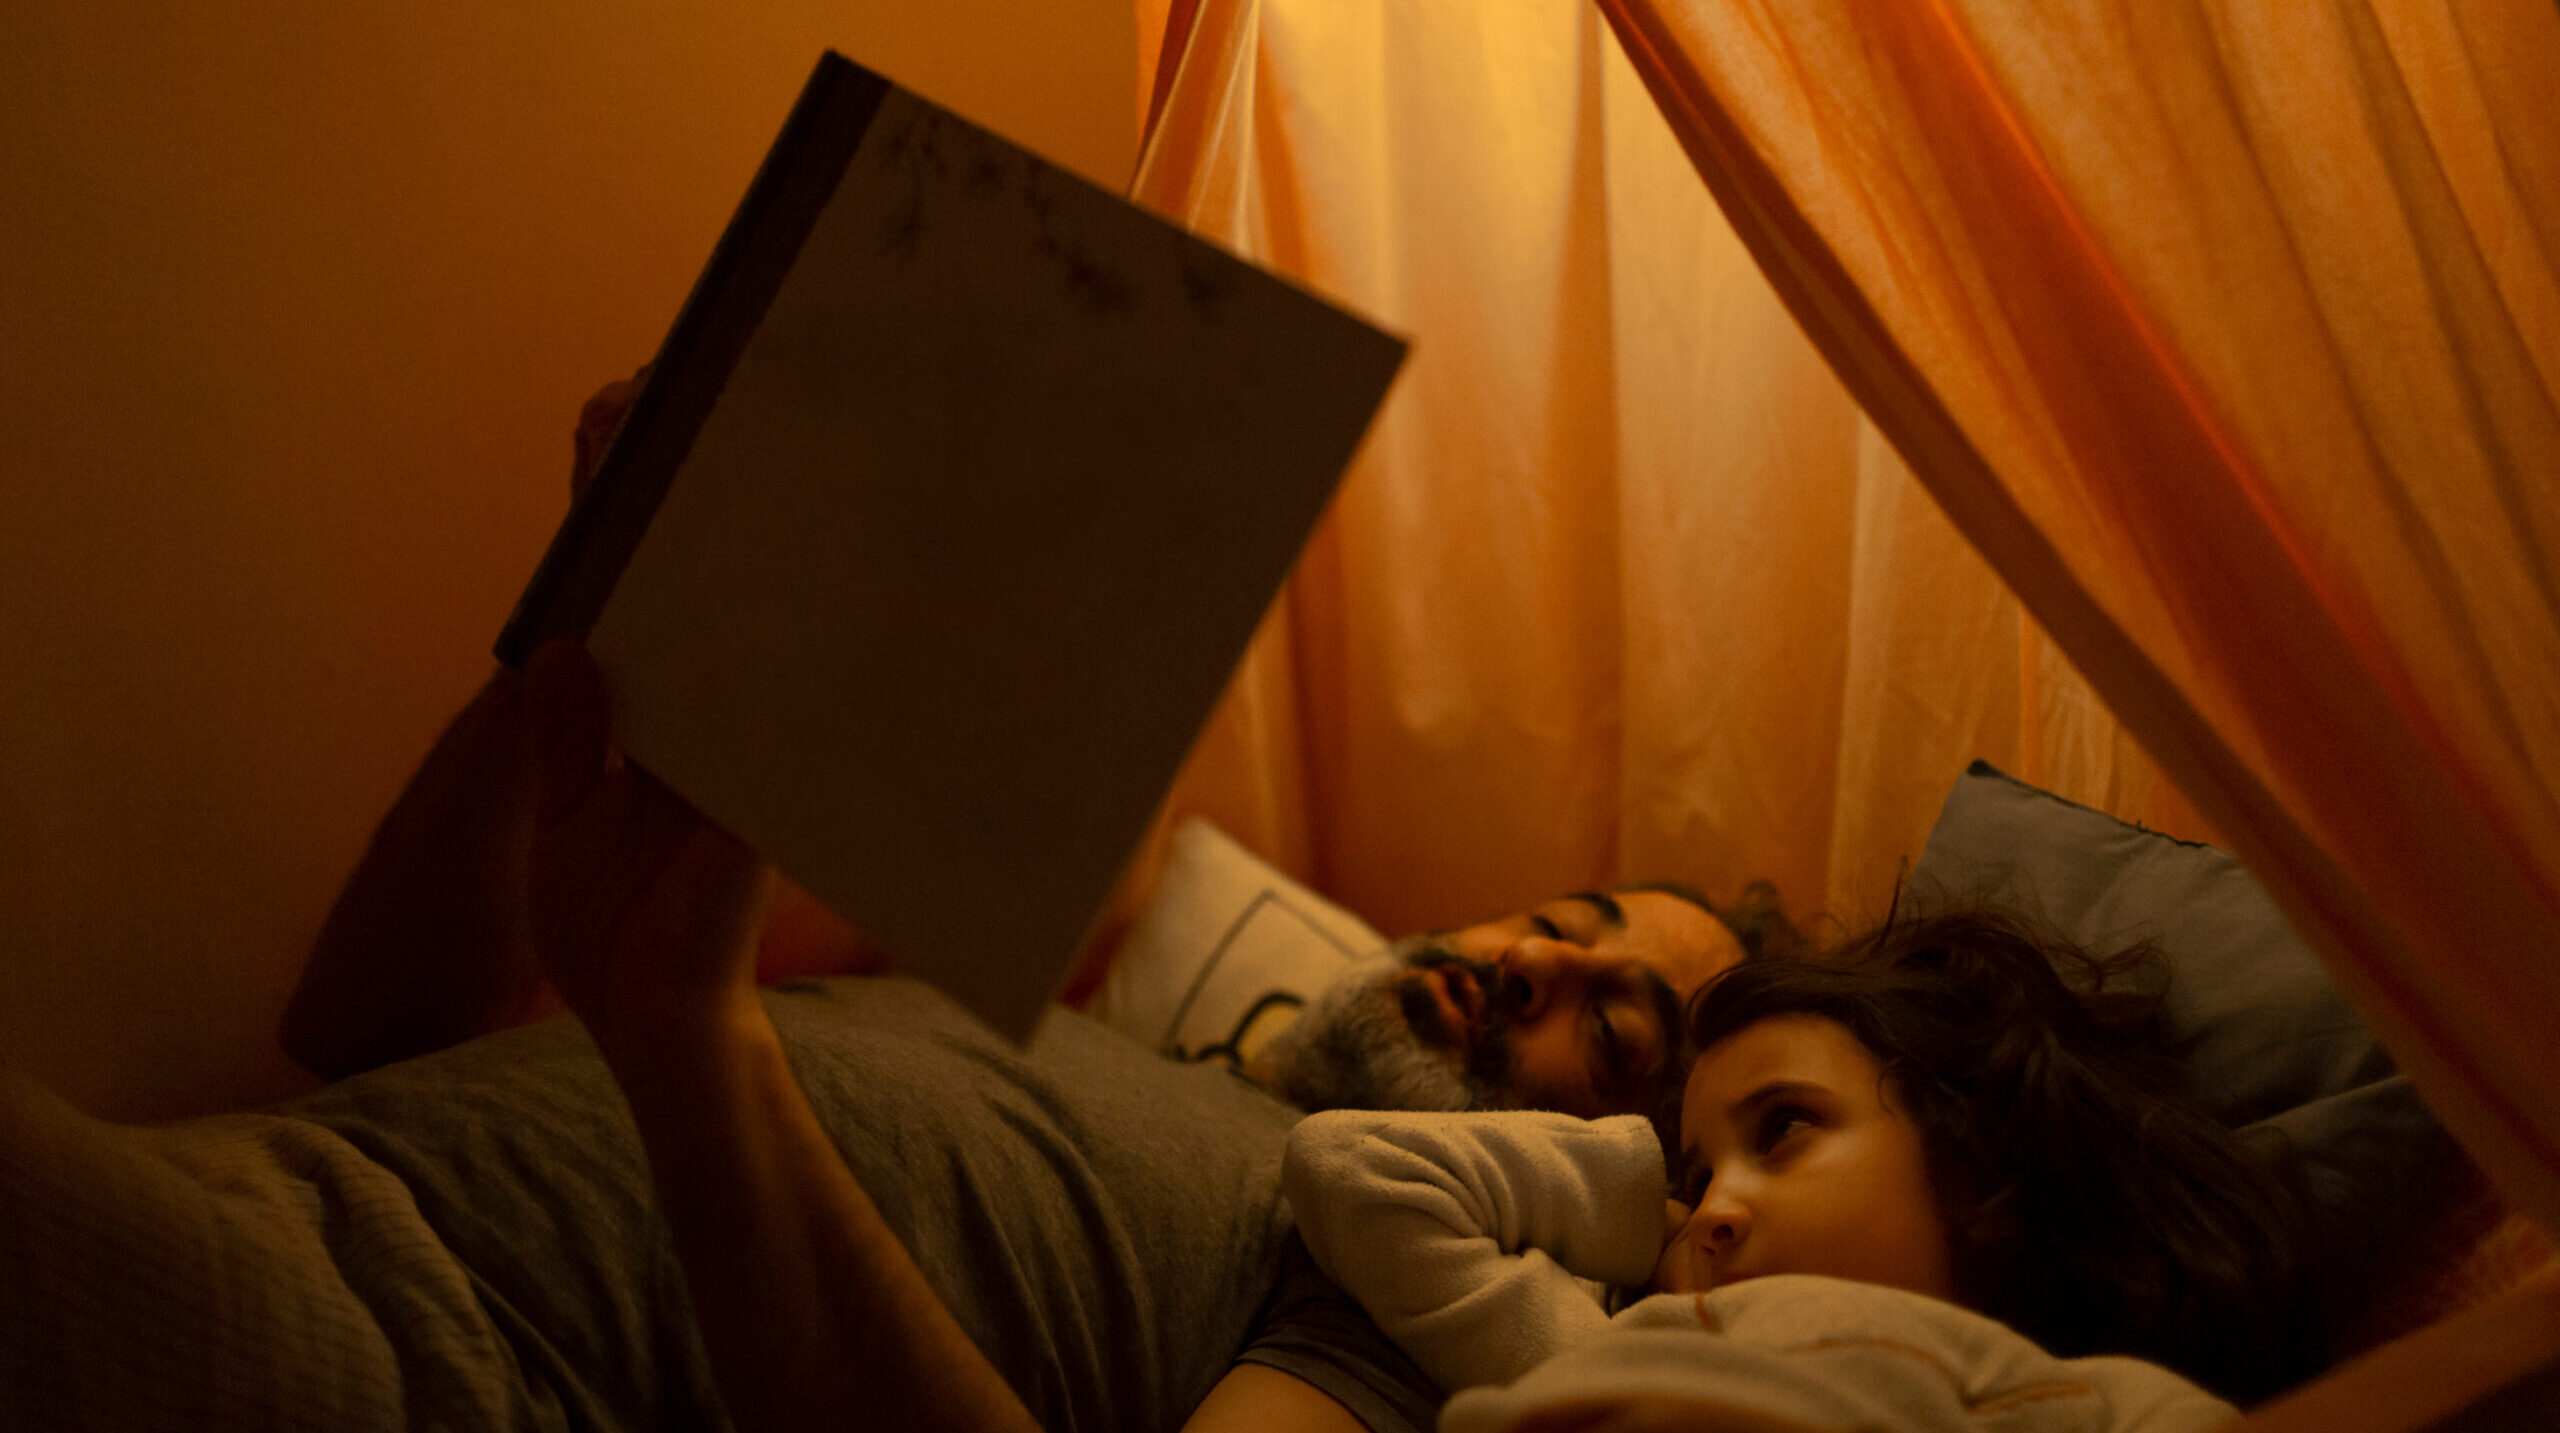 A father reads a book to his daugher in bed. They're under a pink tent in a kids' bedroom under fairy lights in their pajamas.